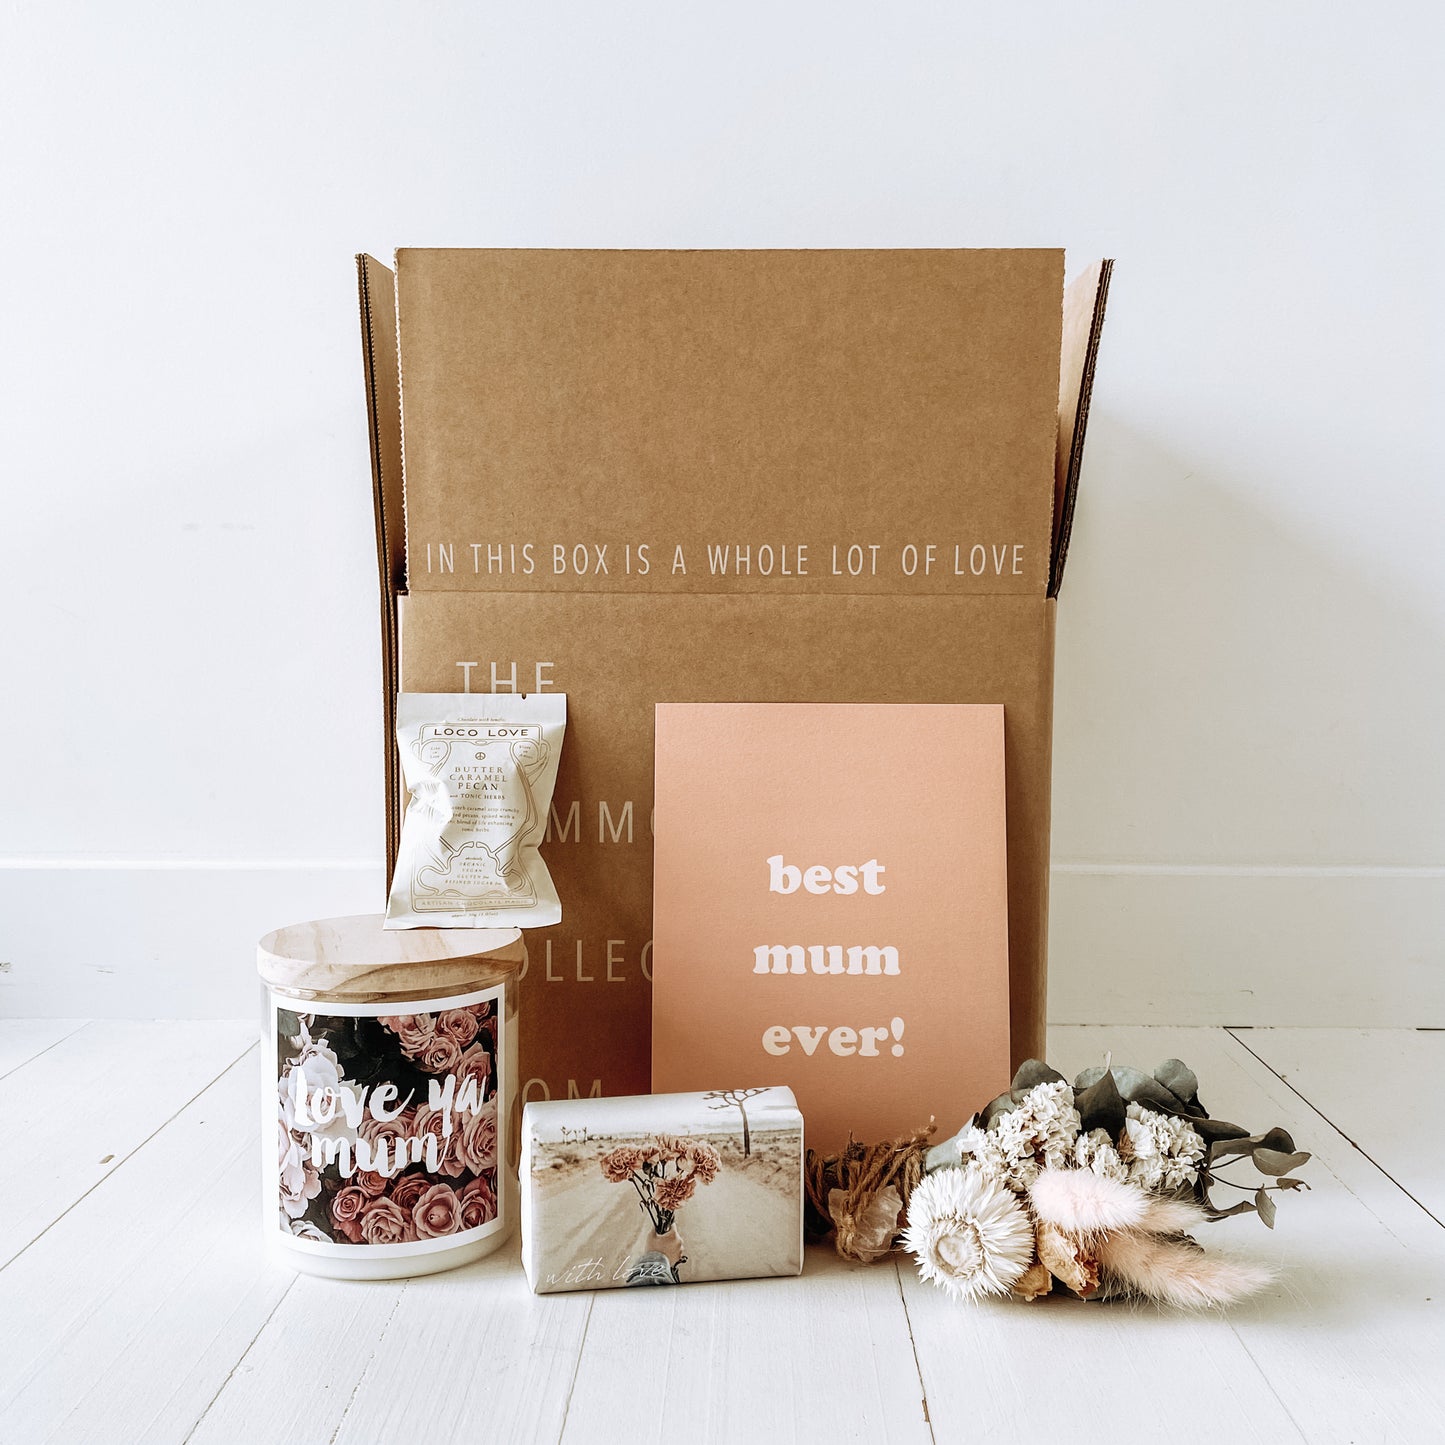 Deluxe Gift Box / Body Bar - XL Candle